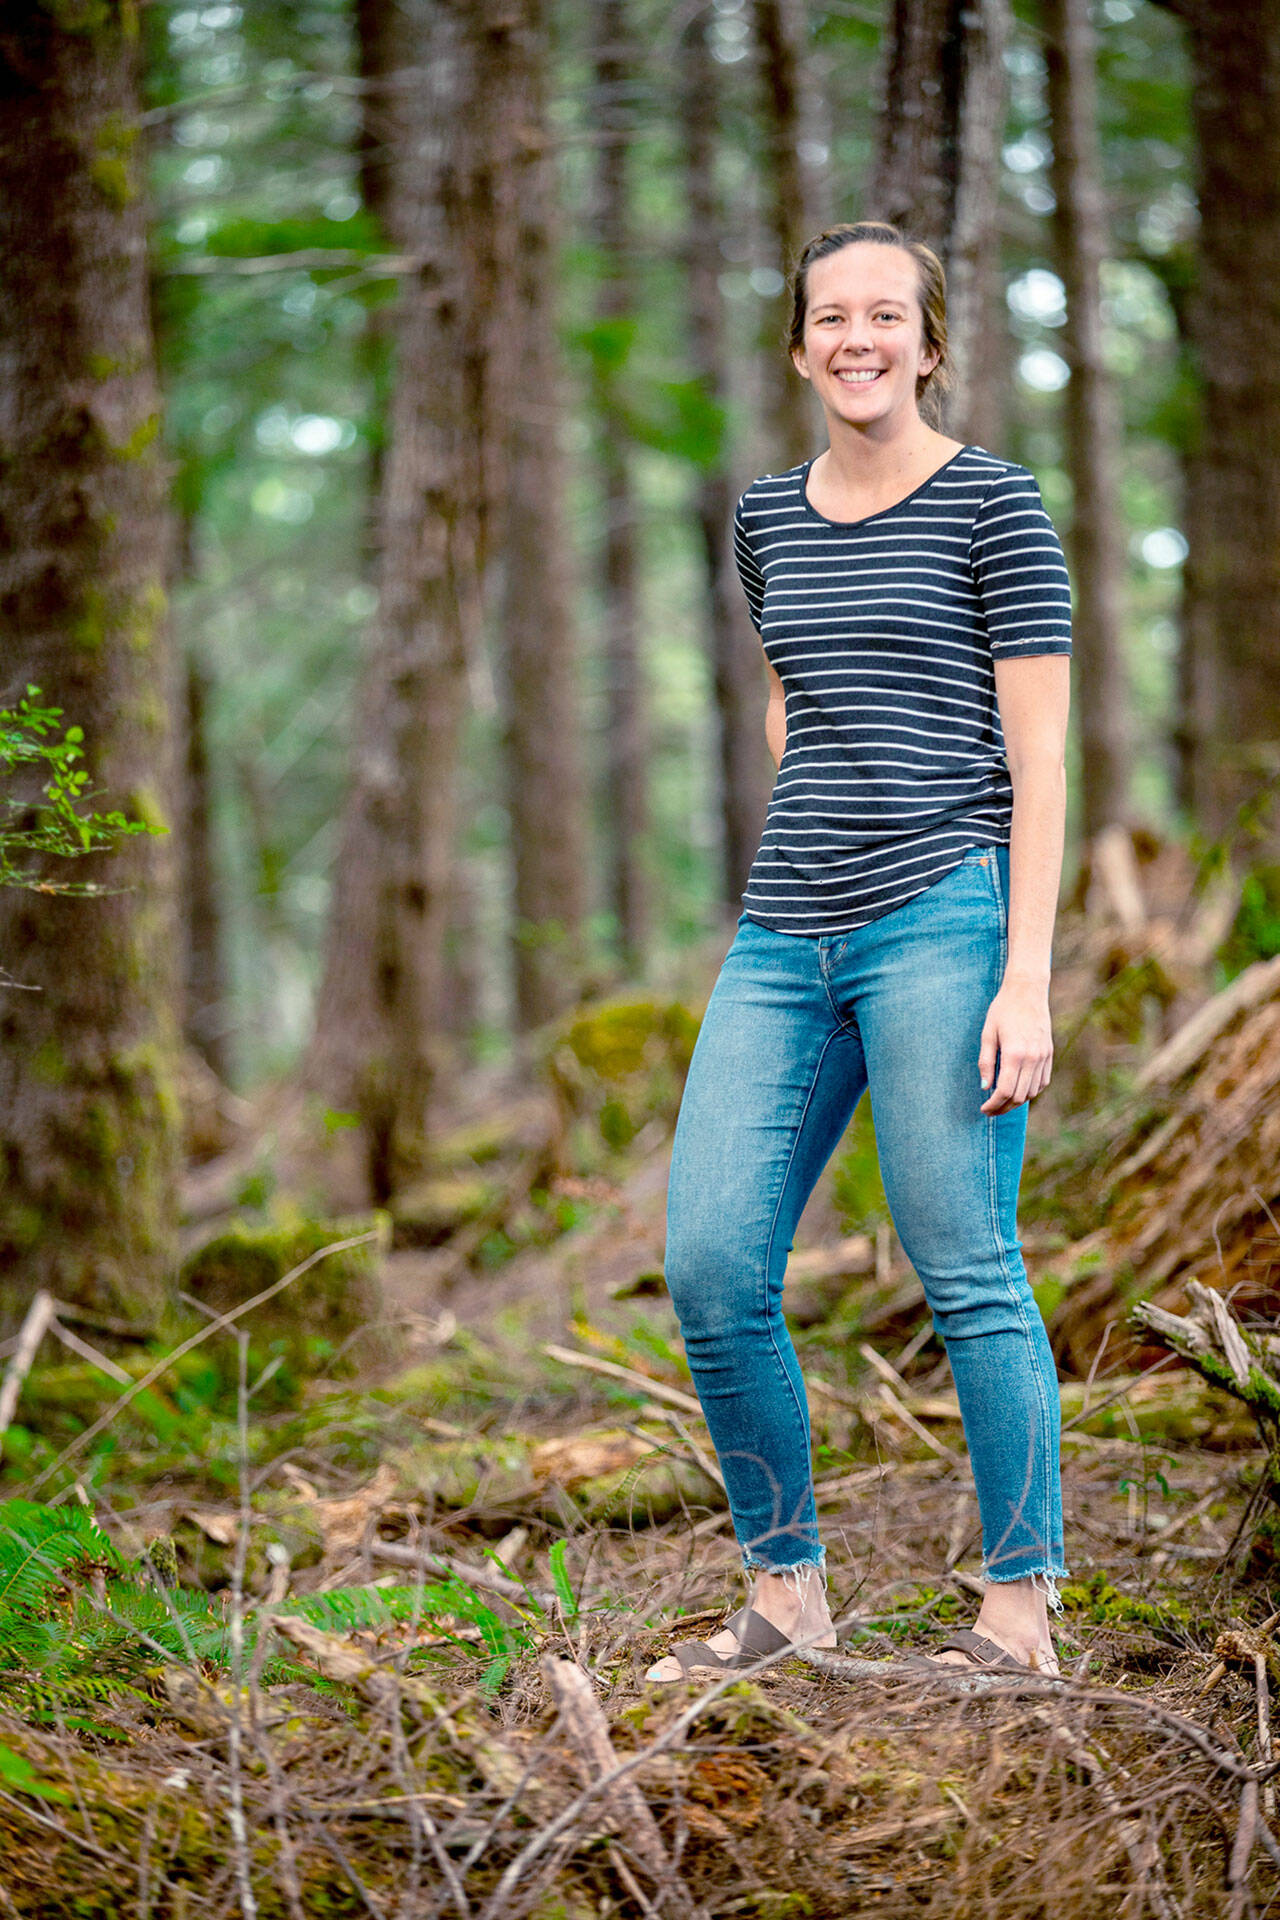 The University of Washington has hired Courtney Bobsin as a research scientist at the Olympic Natural Resource Center in Forks.